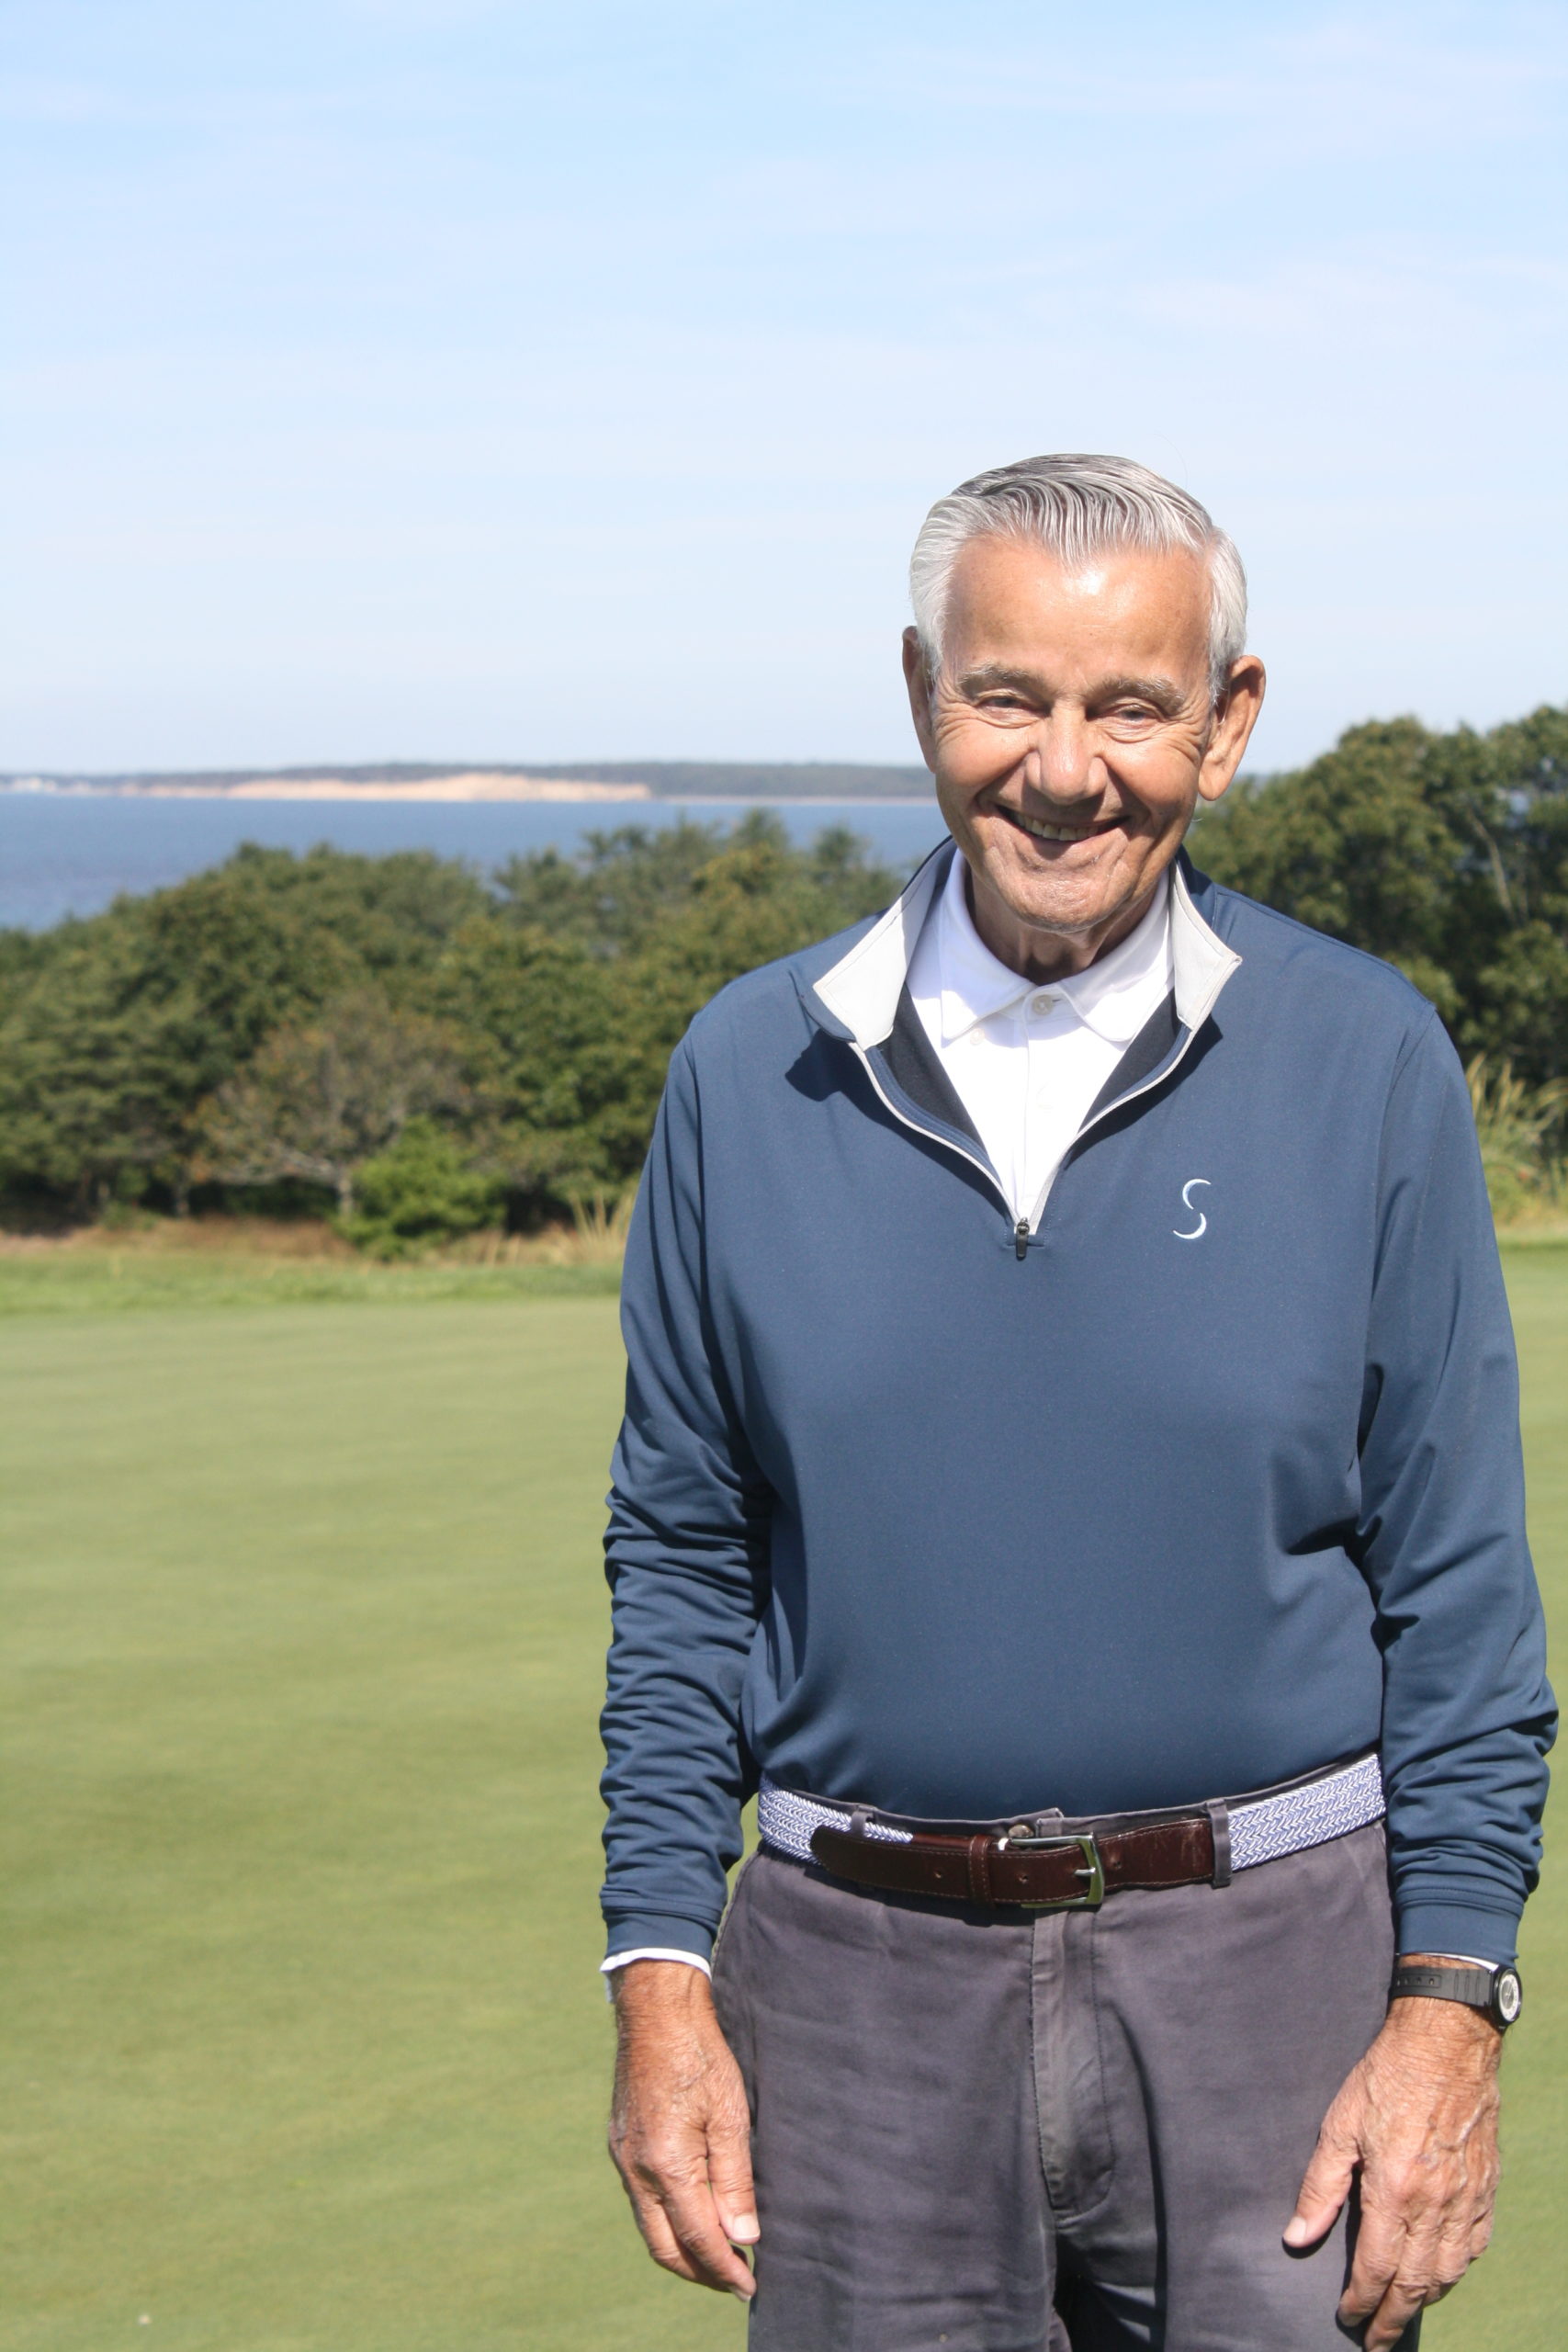 Sebonack Golf Club owner Michael Pascucci was chosen as  the Grand Marshal for the 77th annual Columbus Day Parade in New York City.